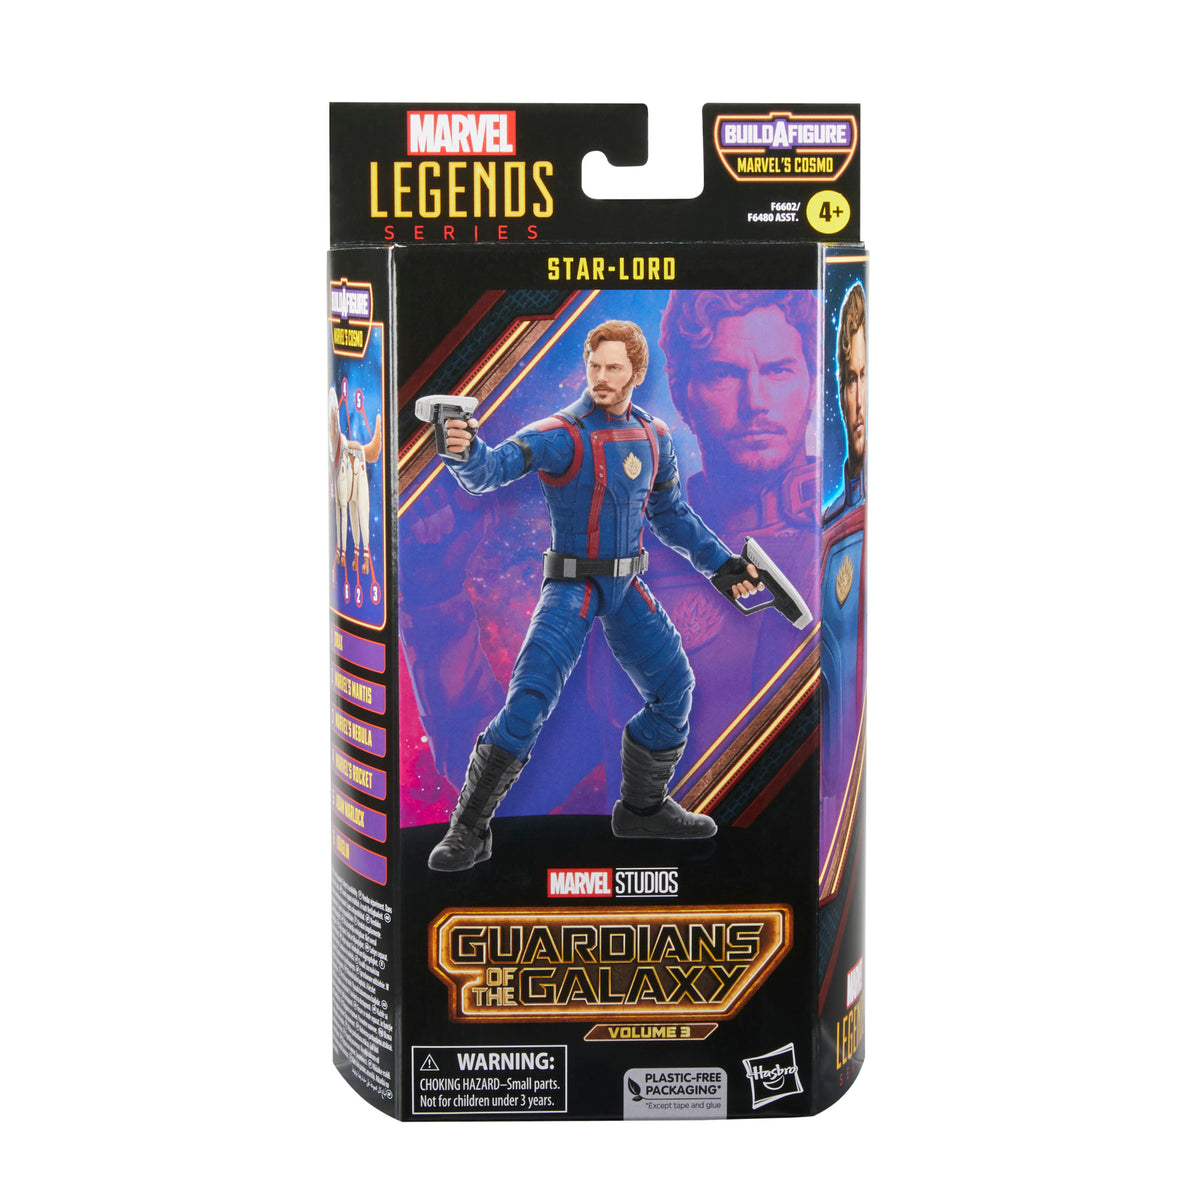 Guardians of the Galaxy Vol. 3 Marvel Legends Star-Lord (Marvel's